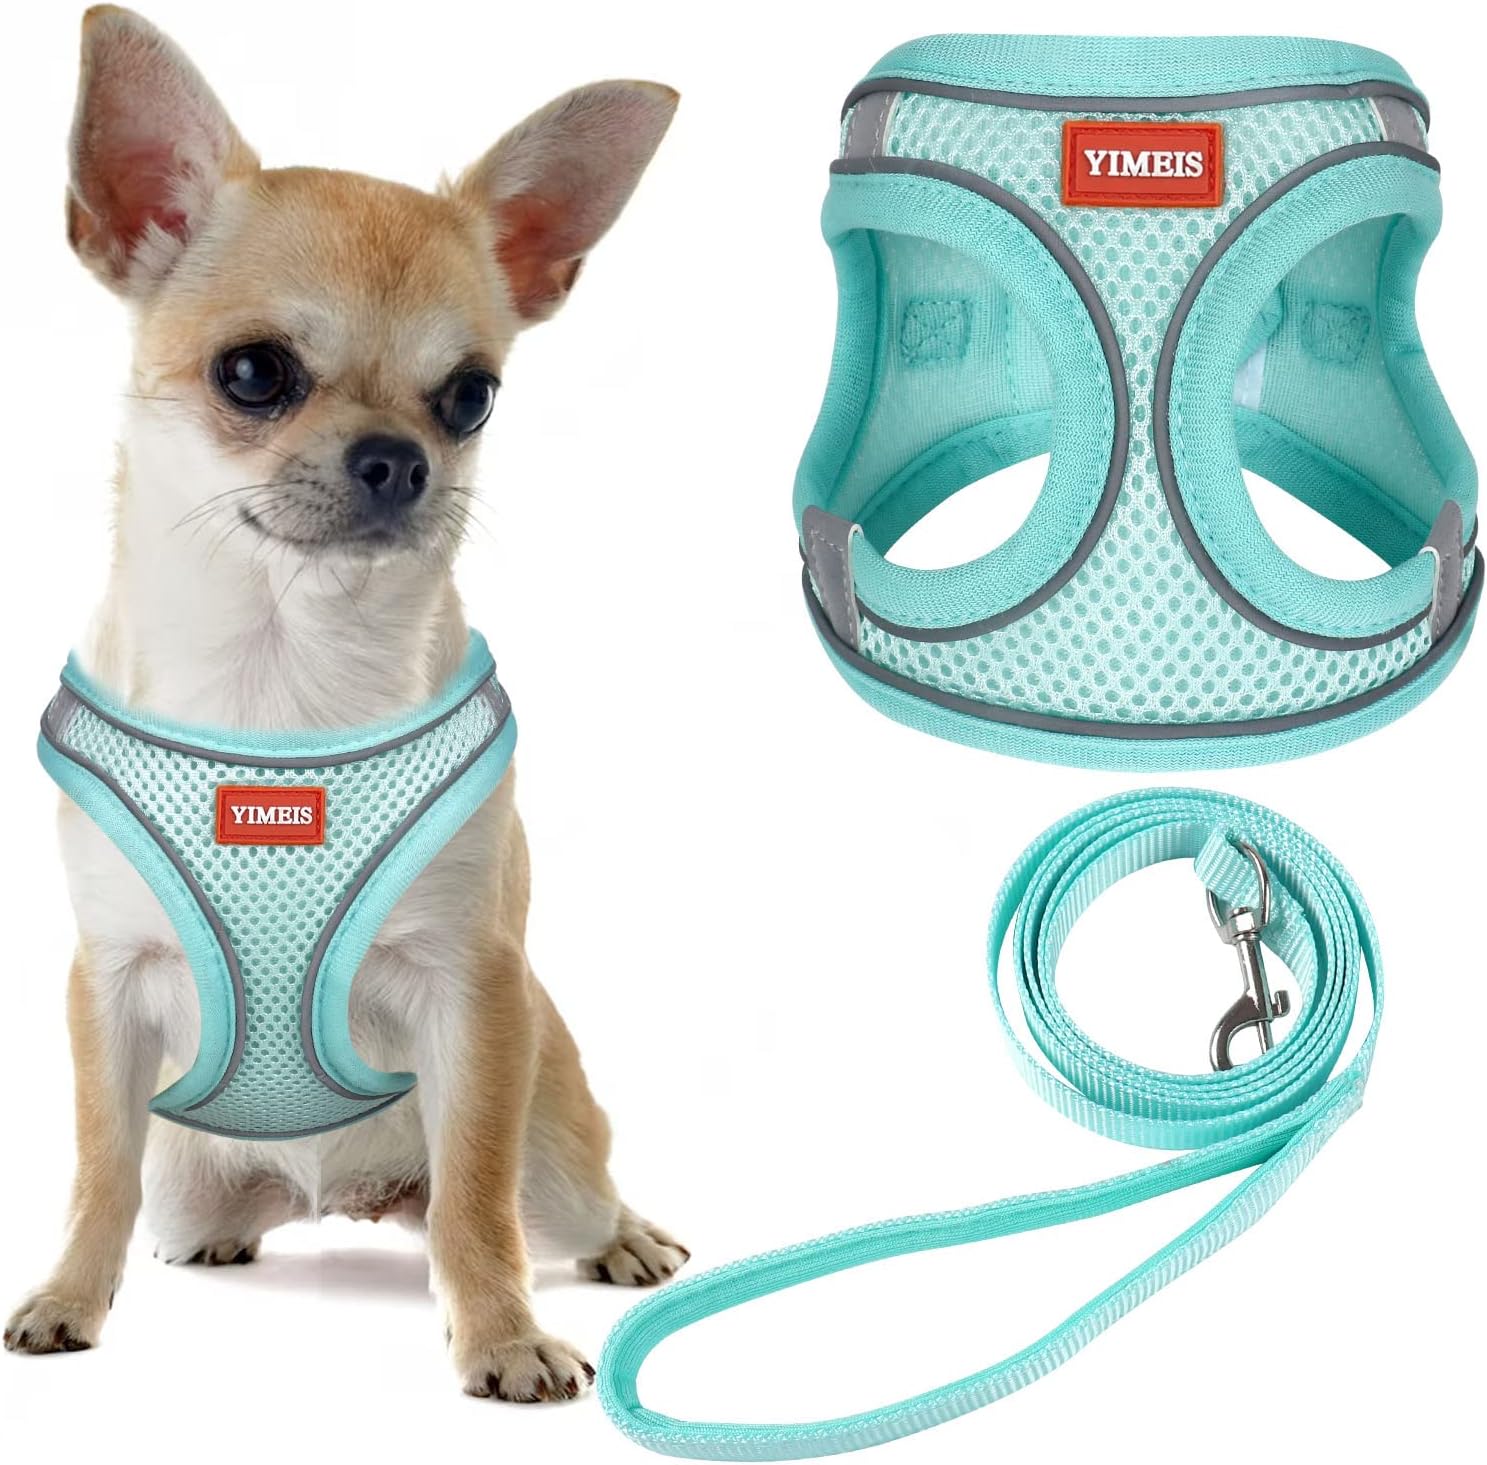 YIMEIS Dog Harness and Leash Set, No Pull Soft Mesh Pet Harness, Reflective Adjustable Puppy Vest for Small Medium Large Dogs, Cats (Tiffany Blue, Medium (Pack of 1)